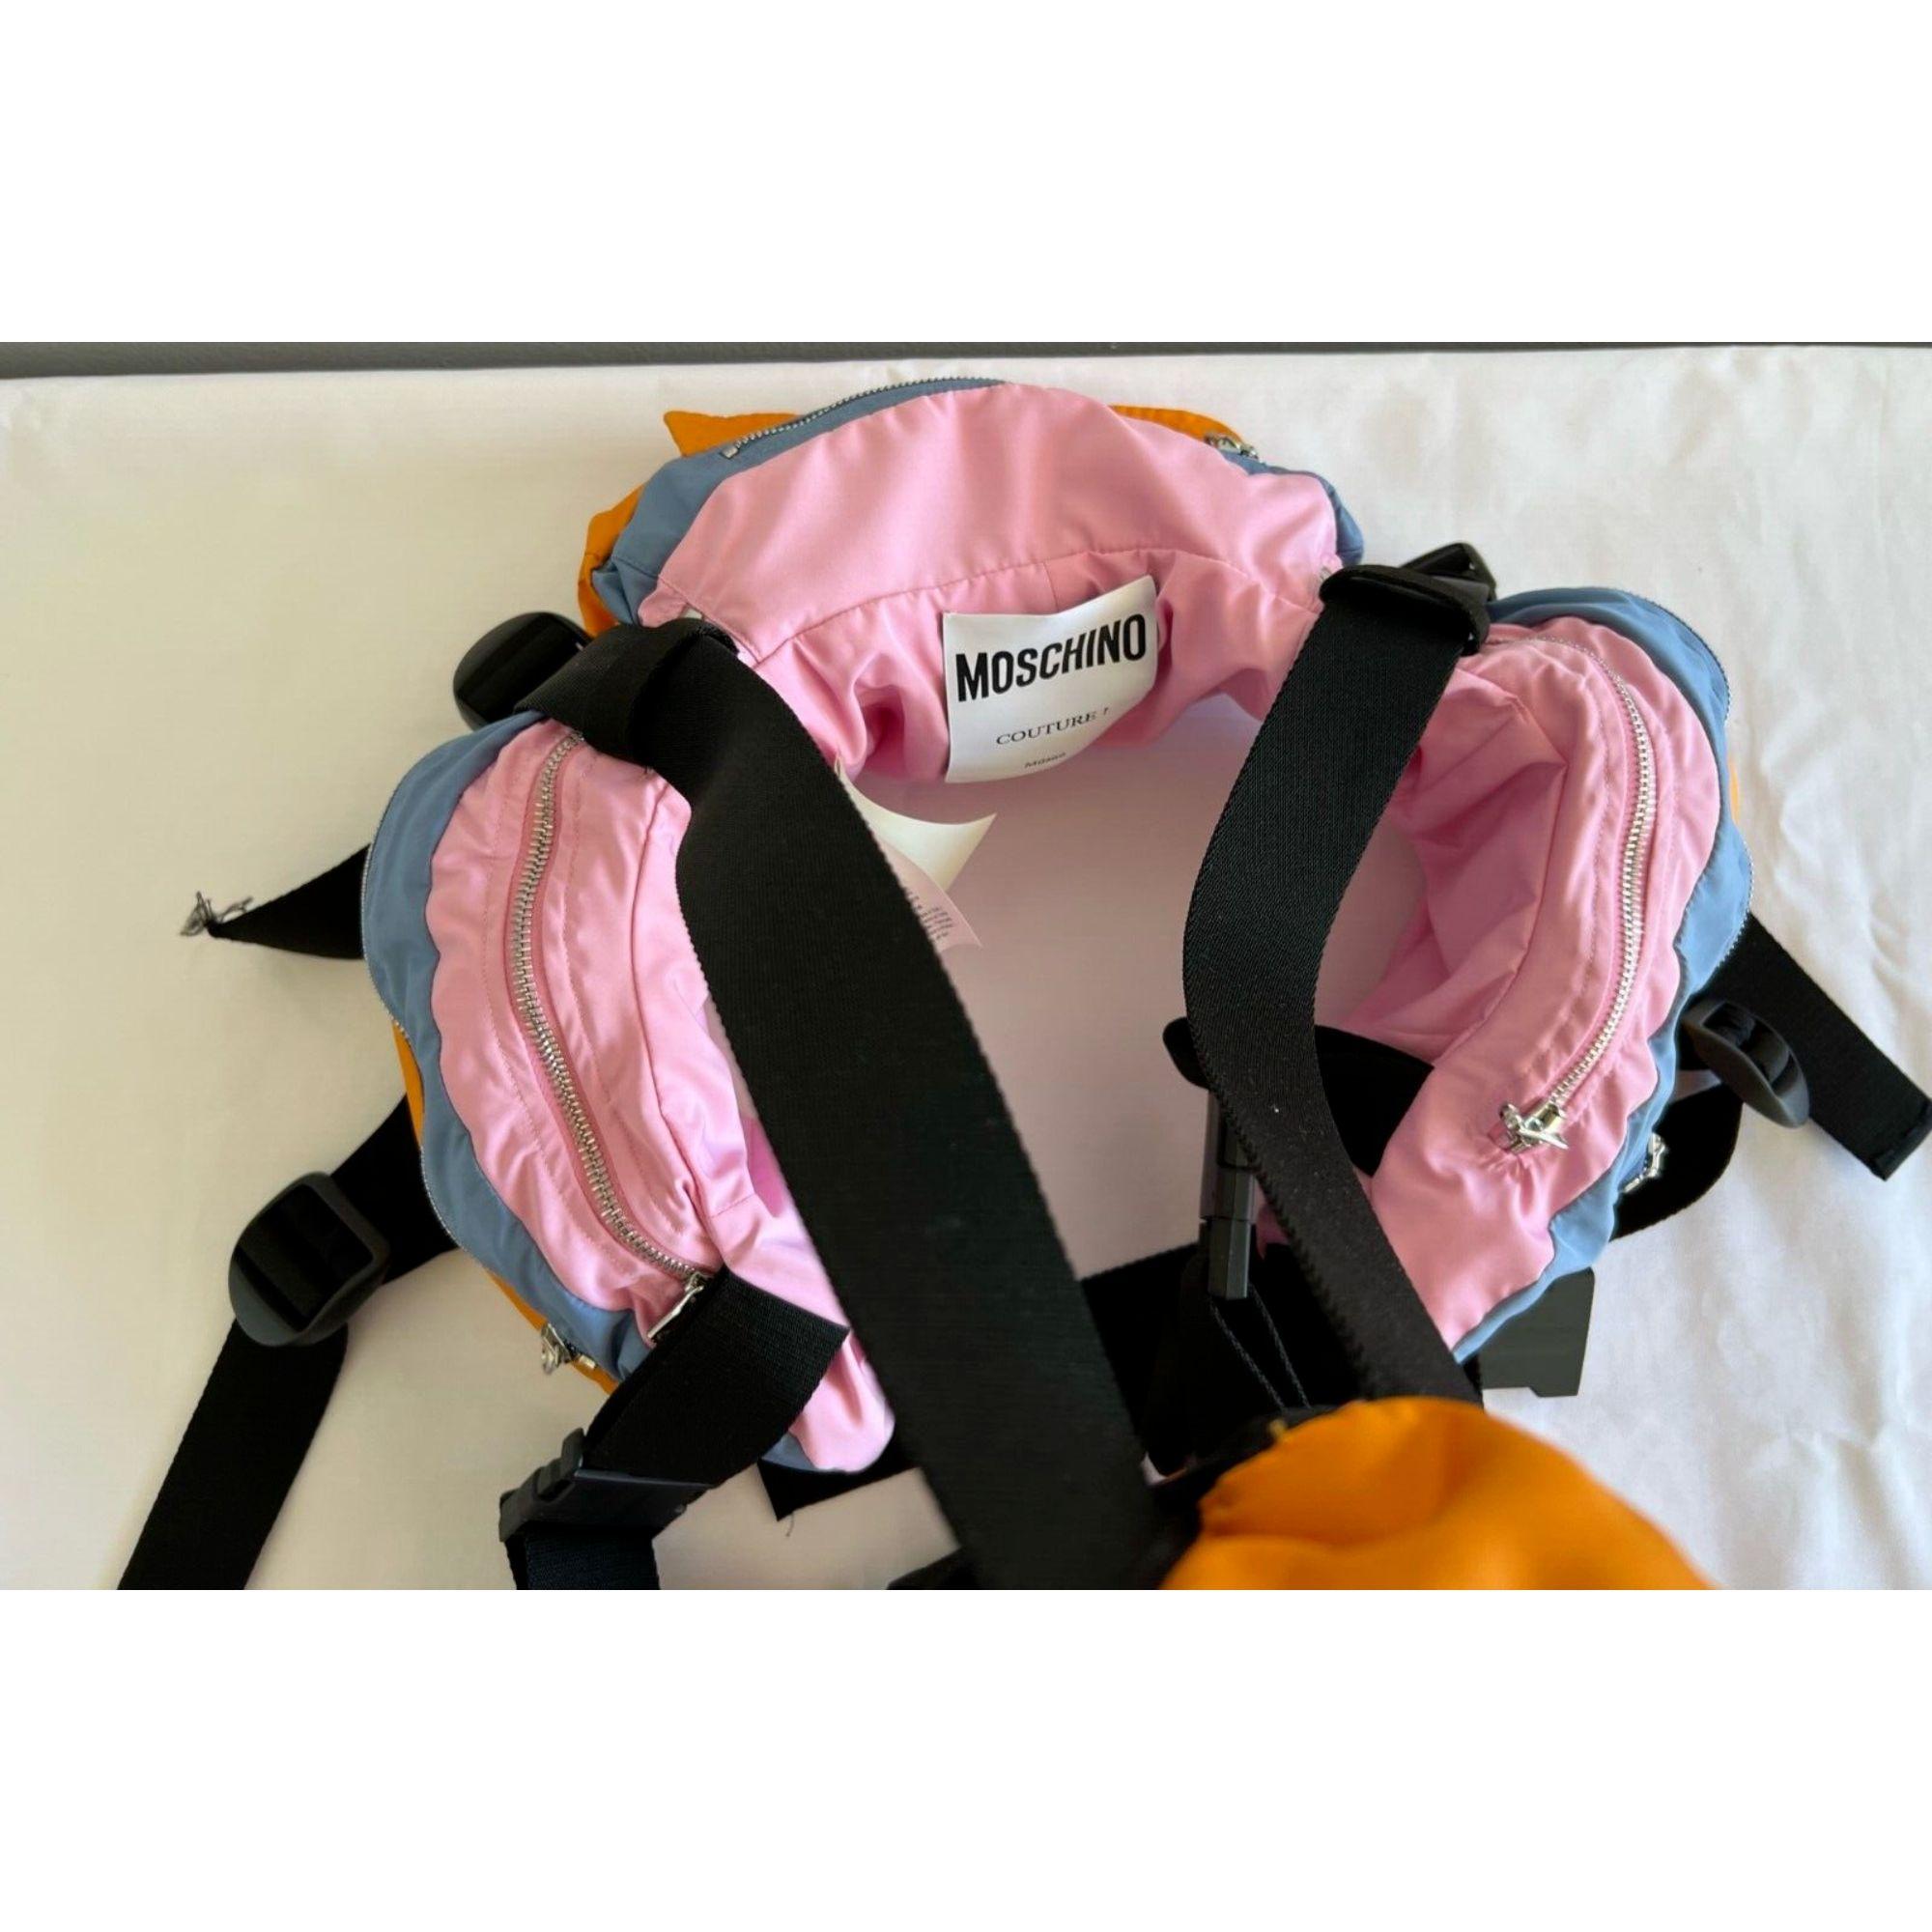 AW20 Moschino Couture Carrier Multiple Fanny Packs Trekking Harness In New Condition For Sale In Palm Springs, CA